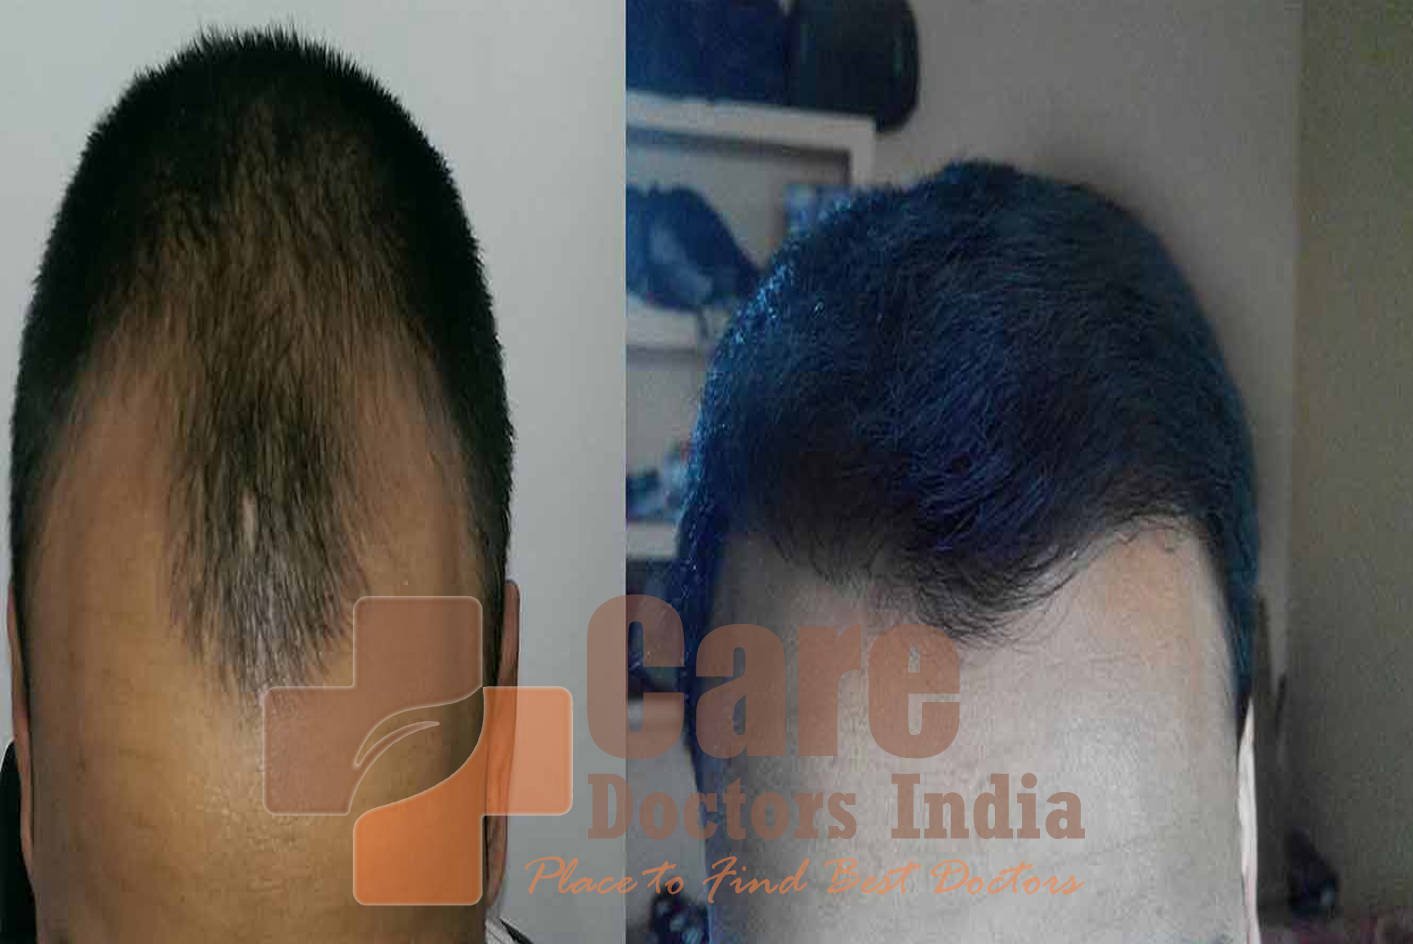 🅲🅳🅸 𝐇𝐚𝐢𝐫 𝐓𝐫𝐚𝐧𝐬𝐩𝐥𝐚𝐧𝐭 𝐒𝐭𝐚𝐫𝐭𝐢𝐧𝐠 @ $𝟓𝟎𝟎/- for  Muscat, Oman Patient | Hair Transplant Surgeons/Doctors in Muscat, Oman